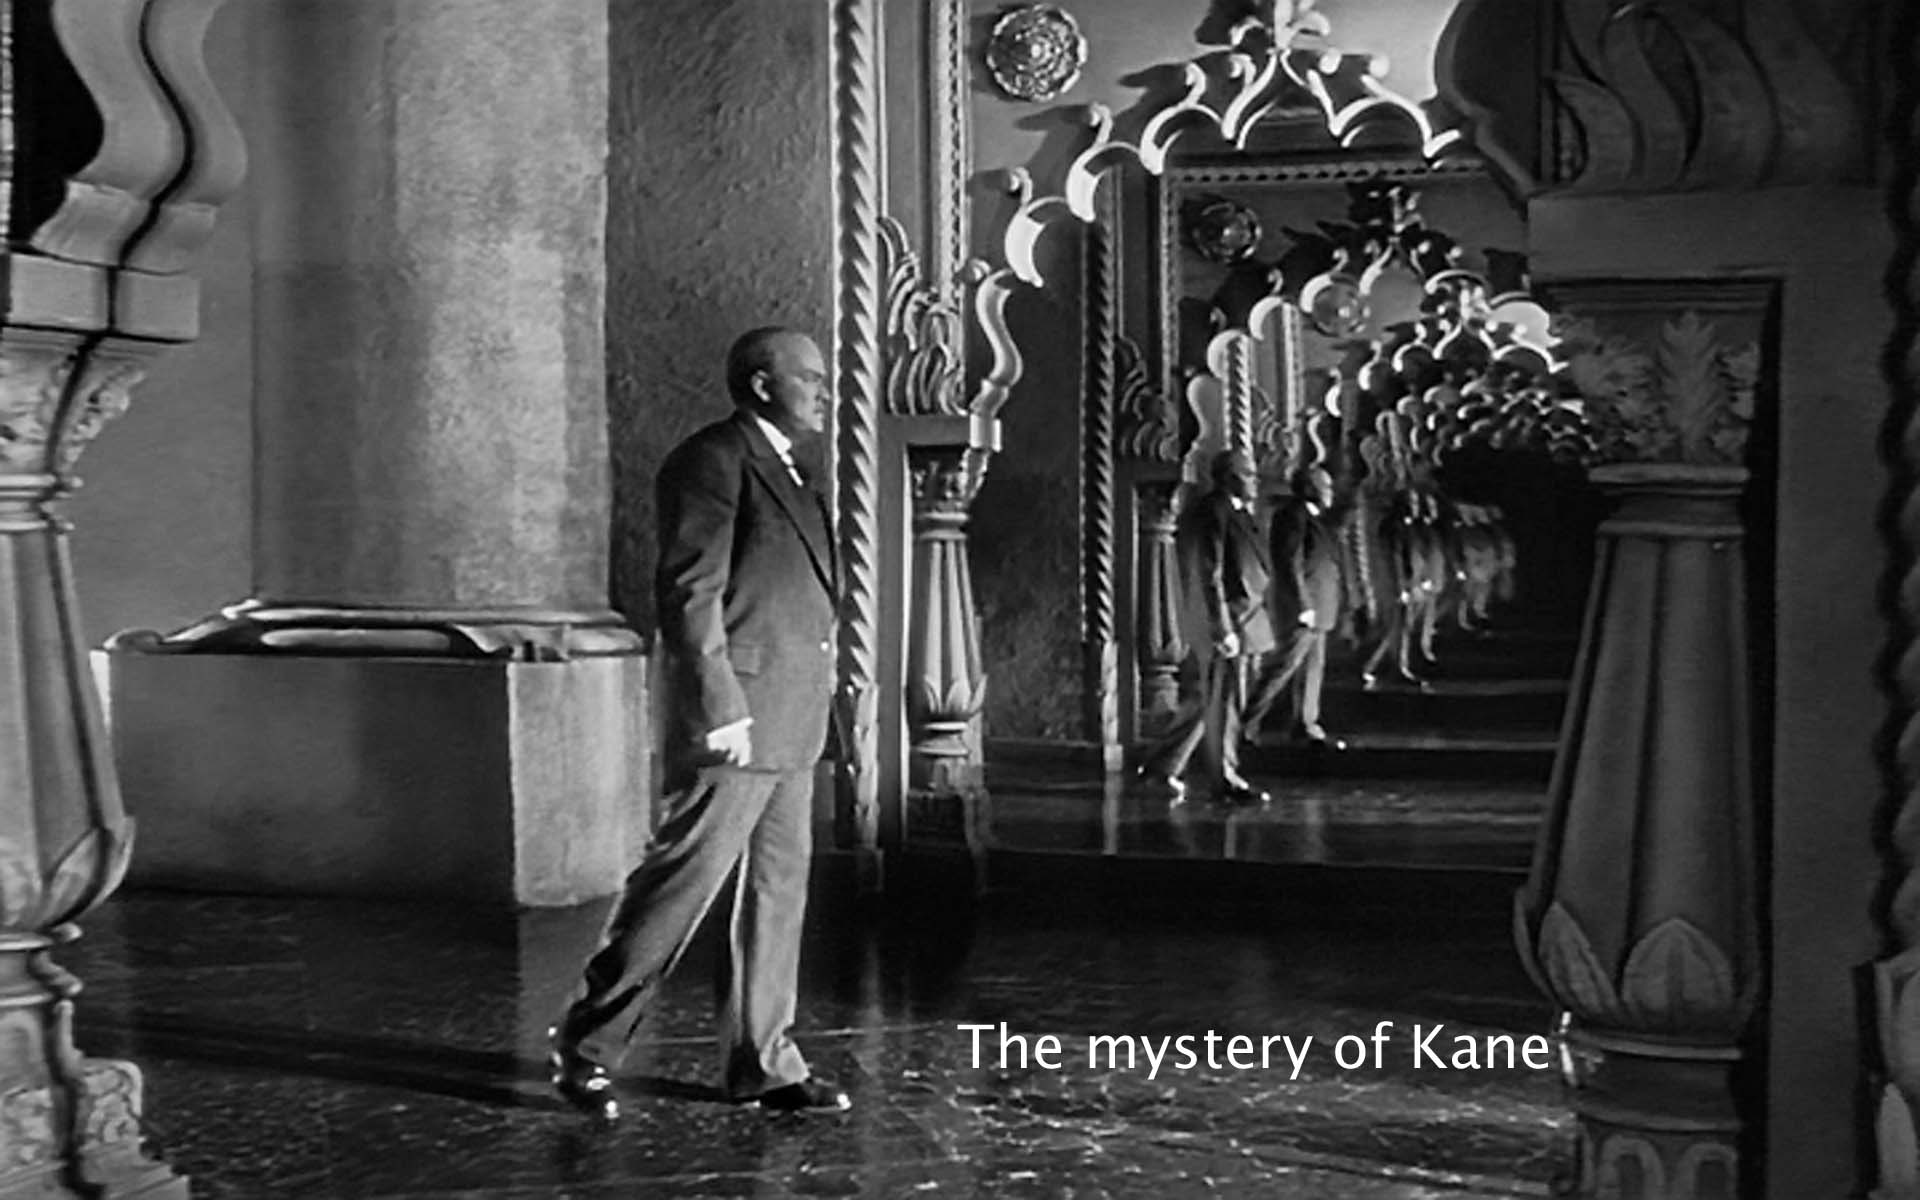 The mystery of Kane